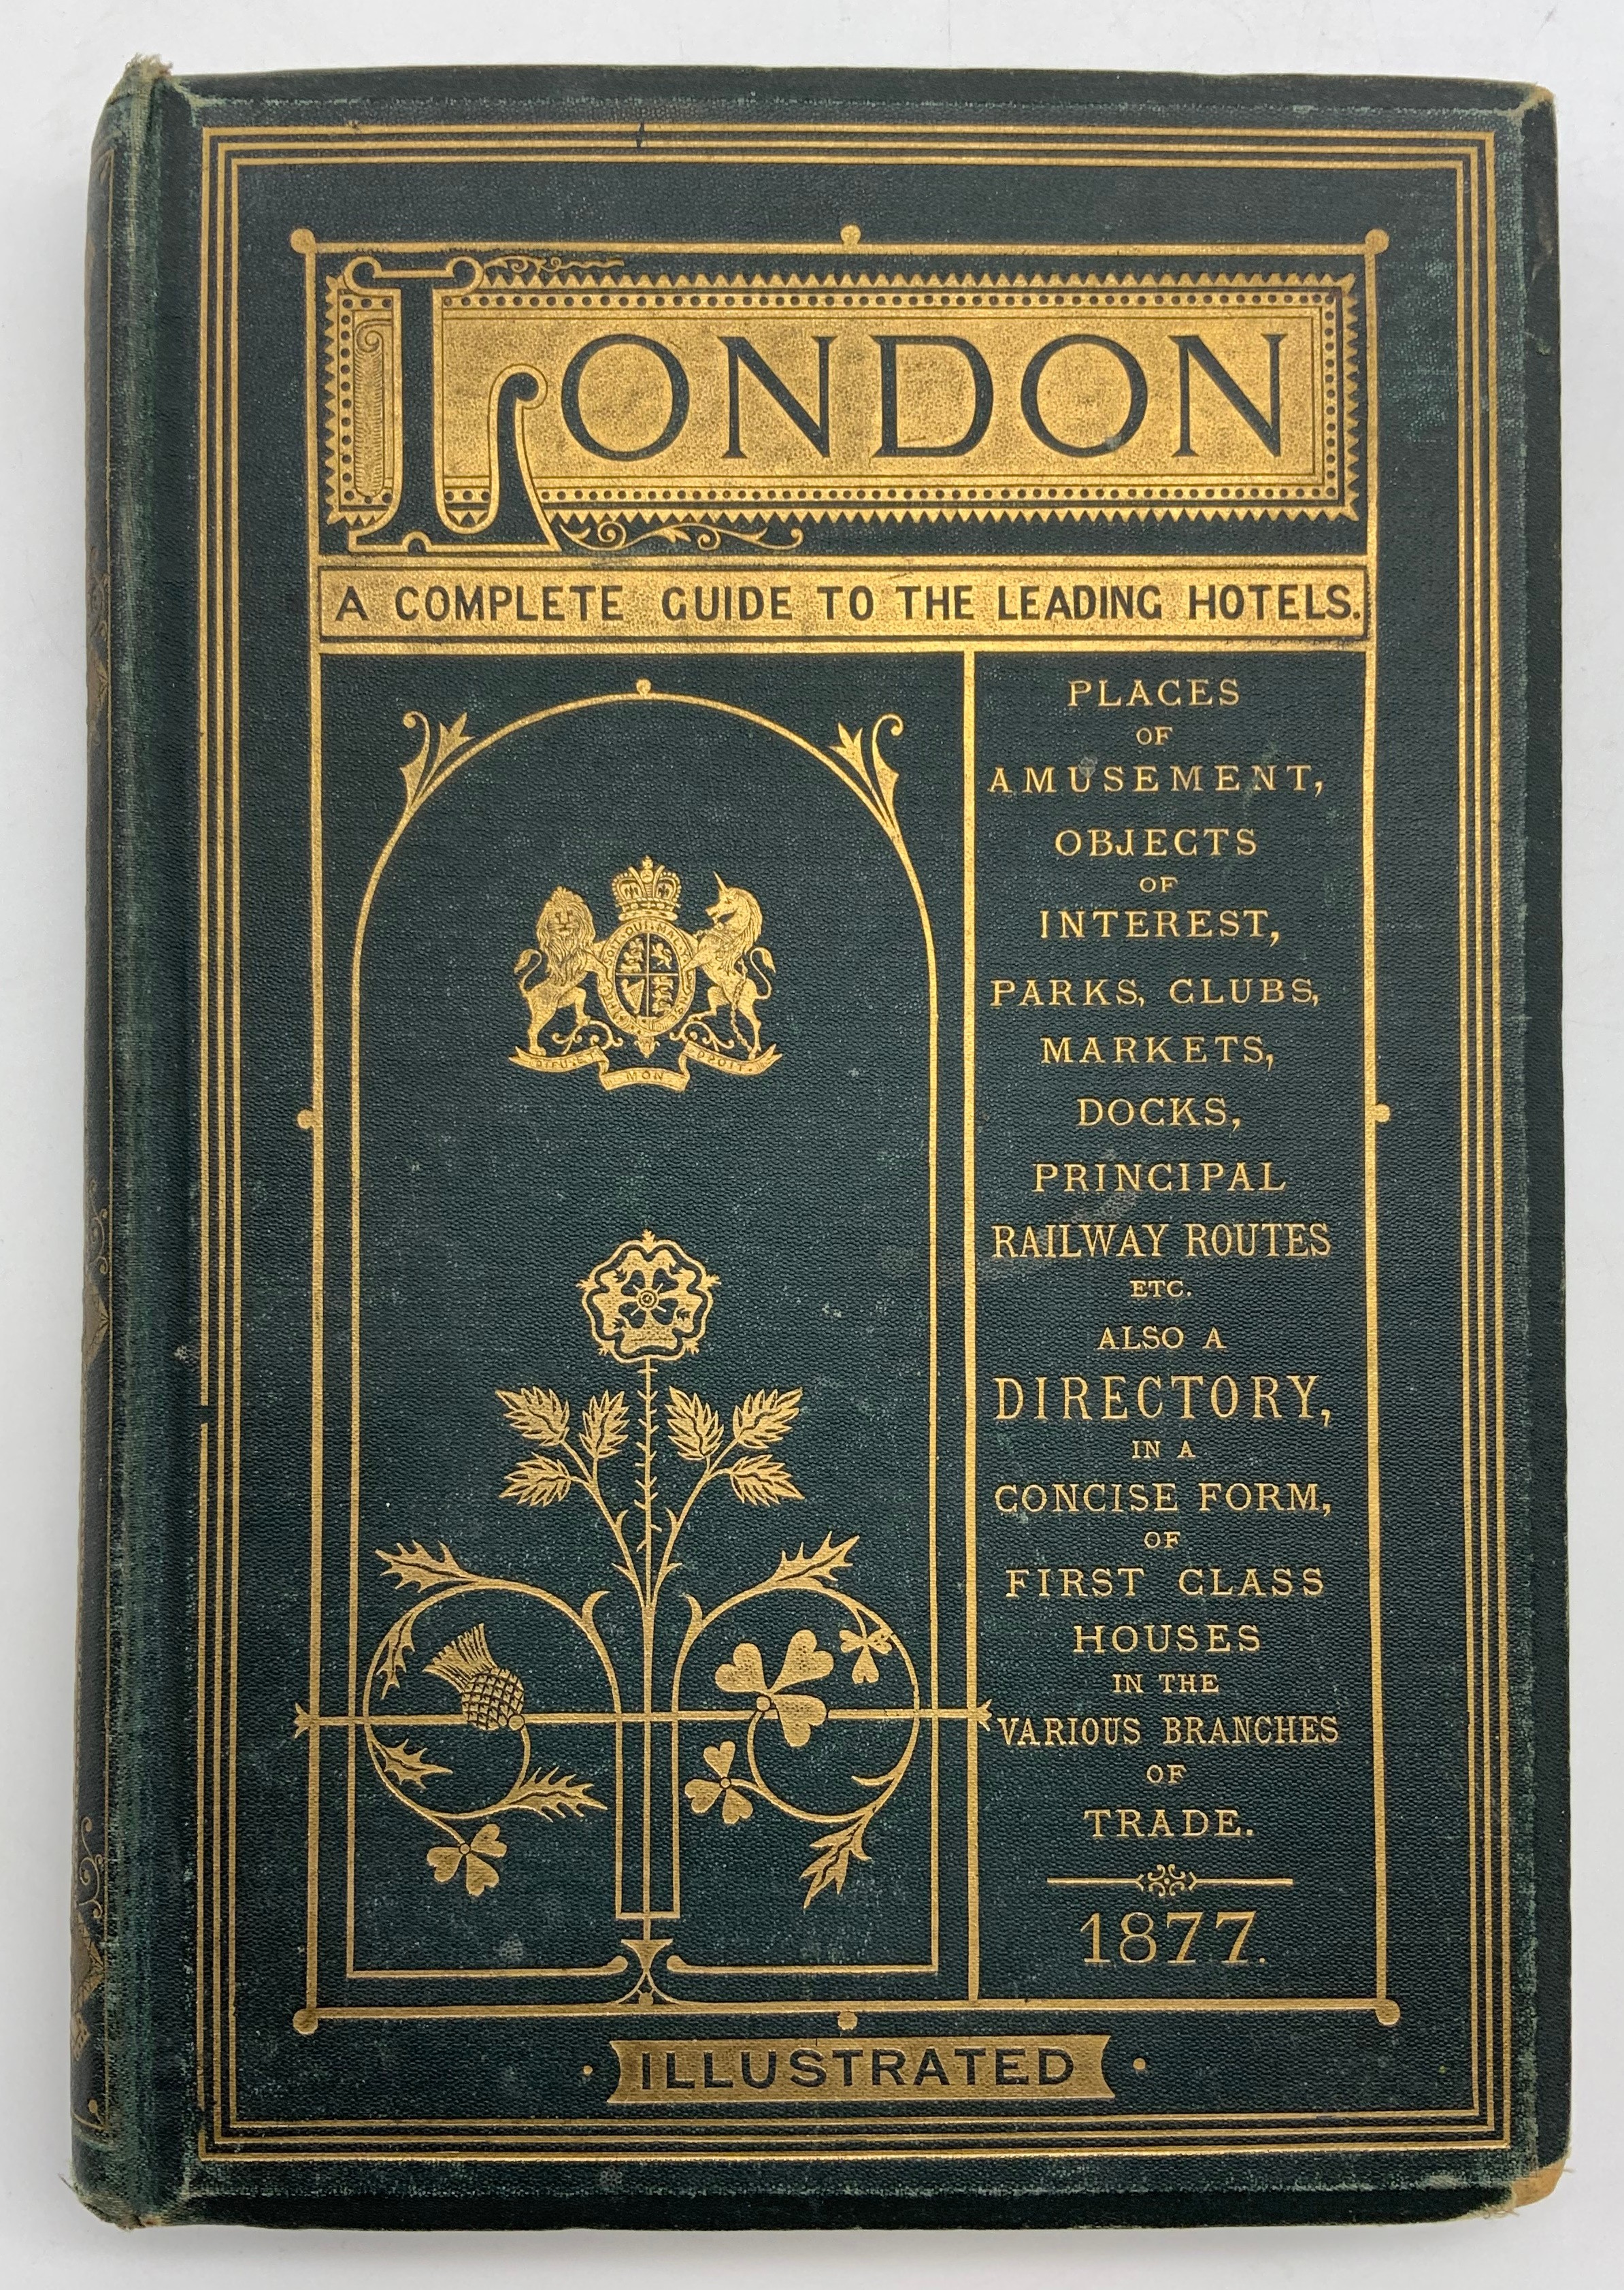 1877 LONDON A COMPLETE GUIDE TO THE LEADING HOTELS